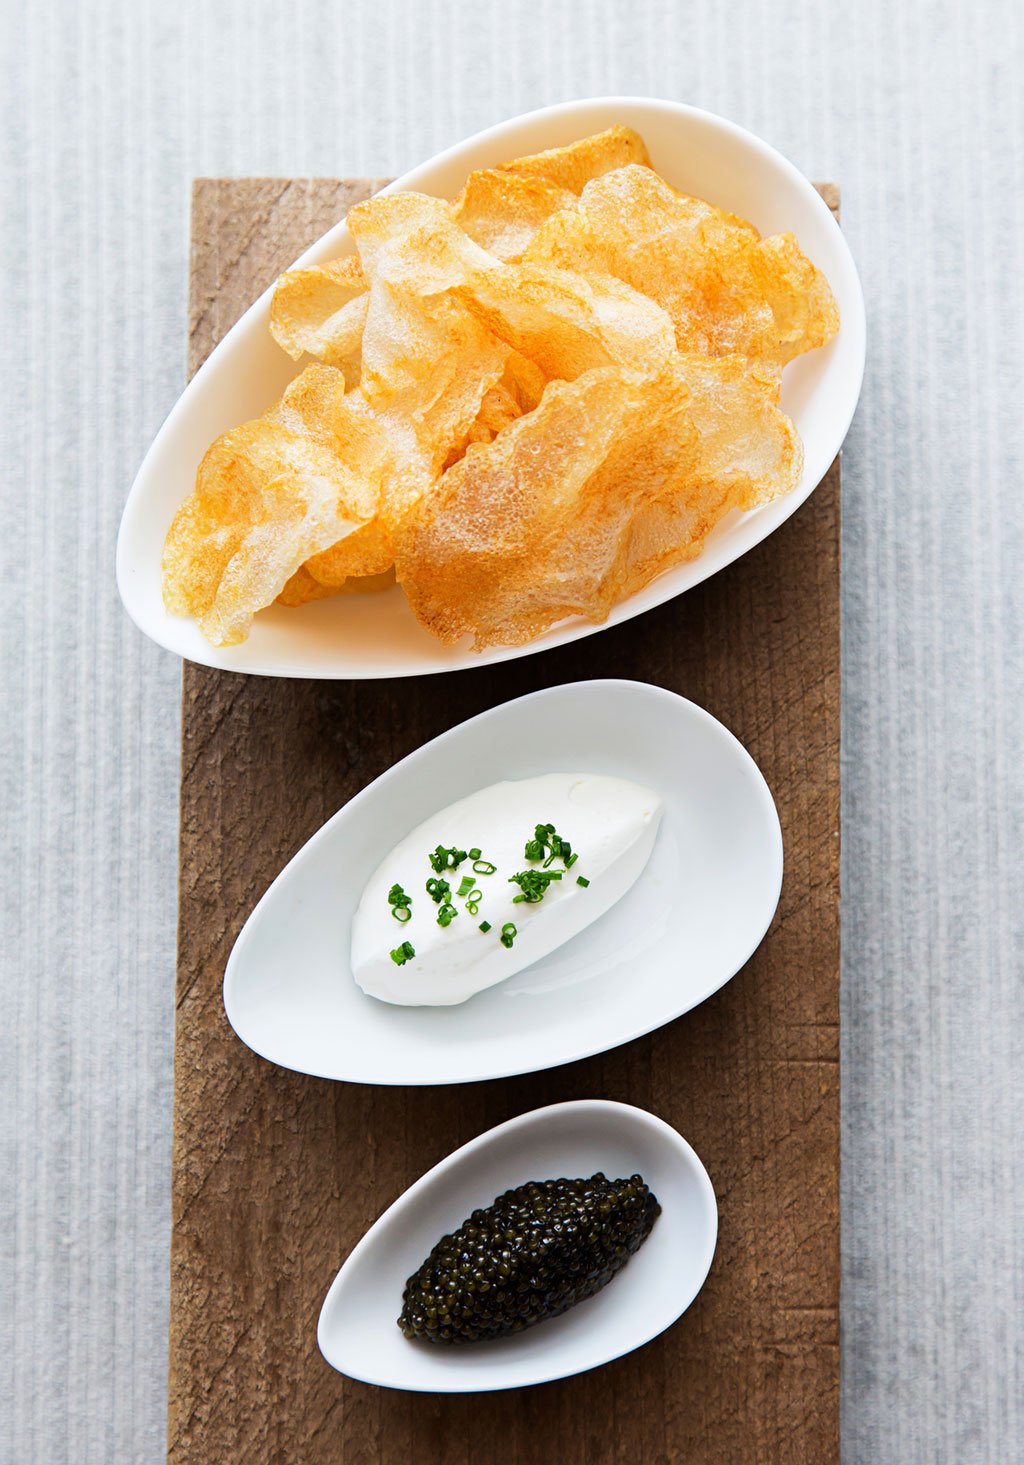 Get your fill of fancy potato chips at Kinship. Photograph by Scott Suchman.